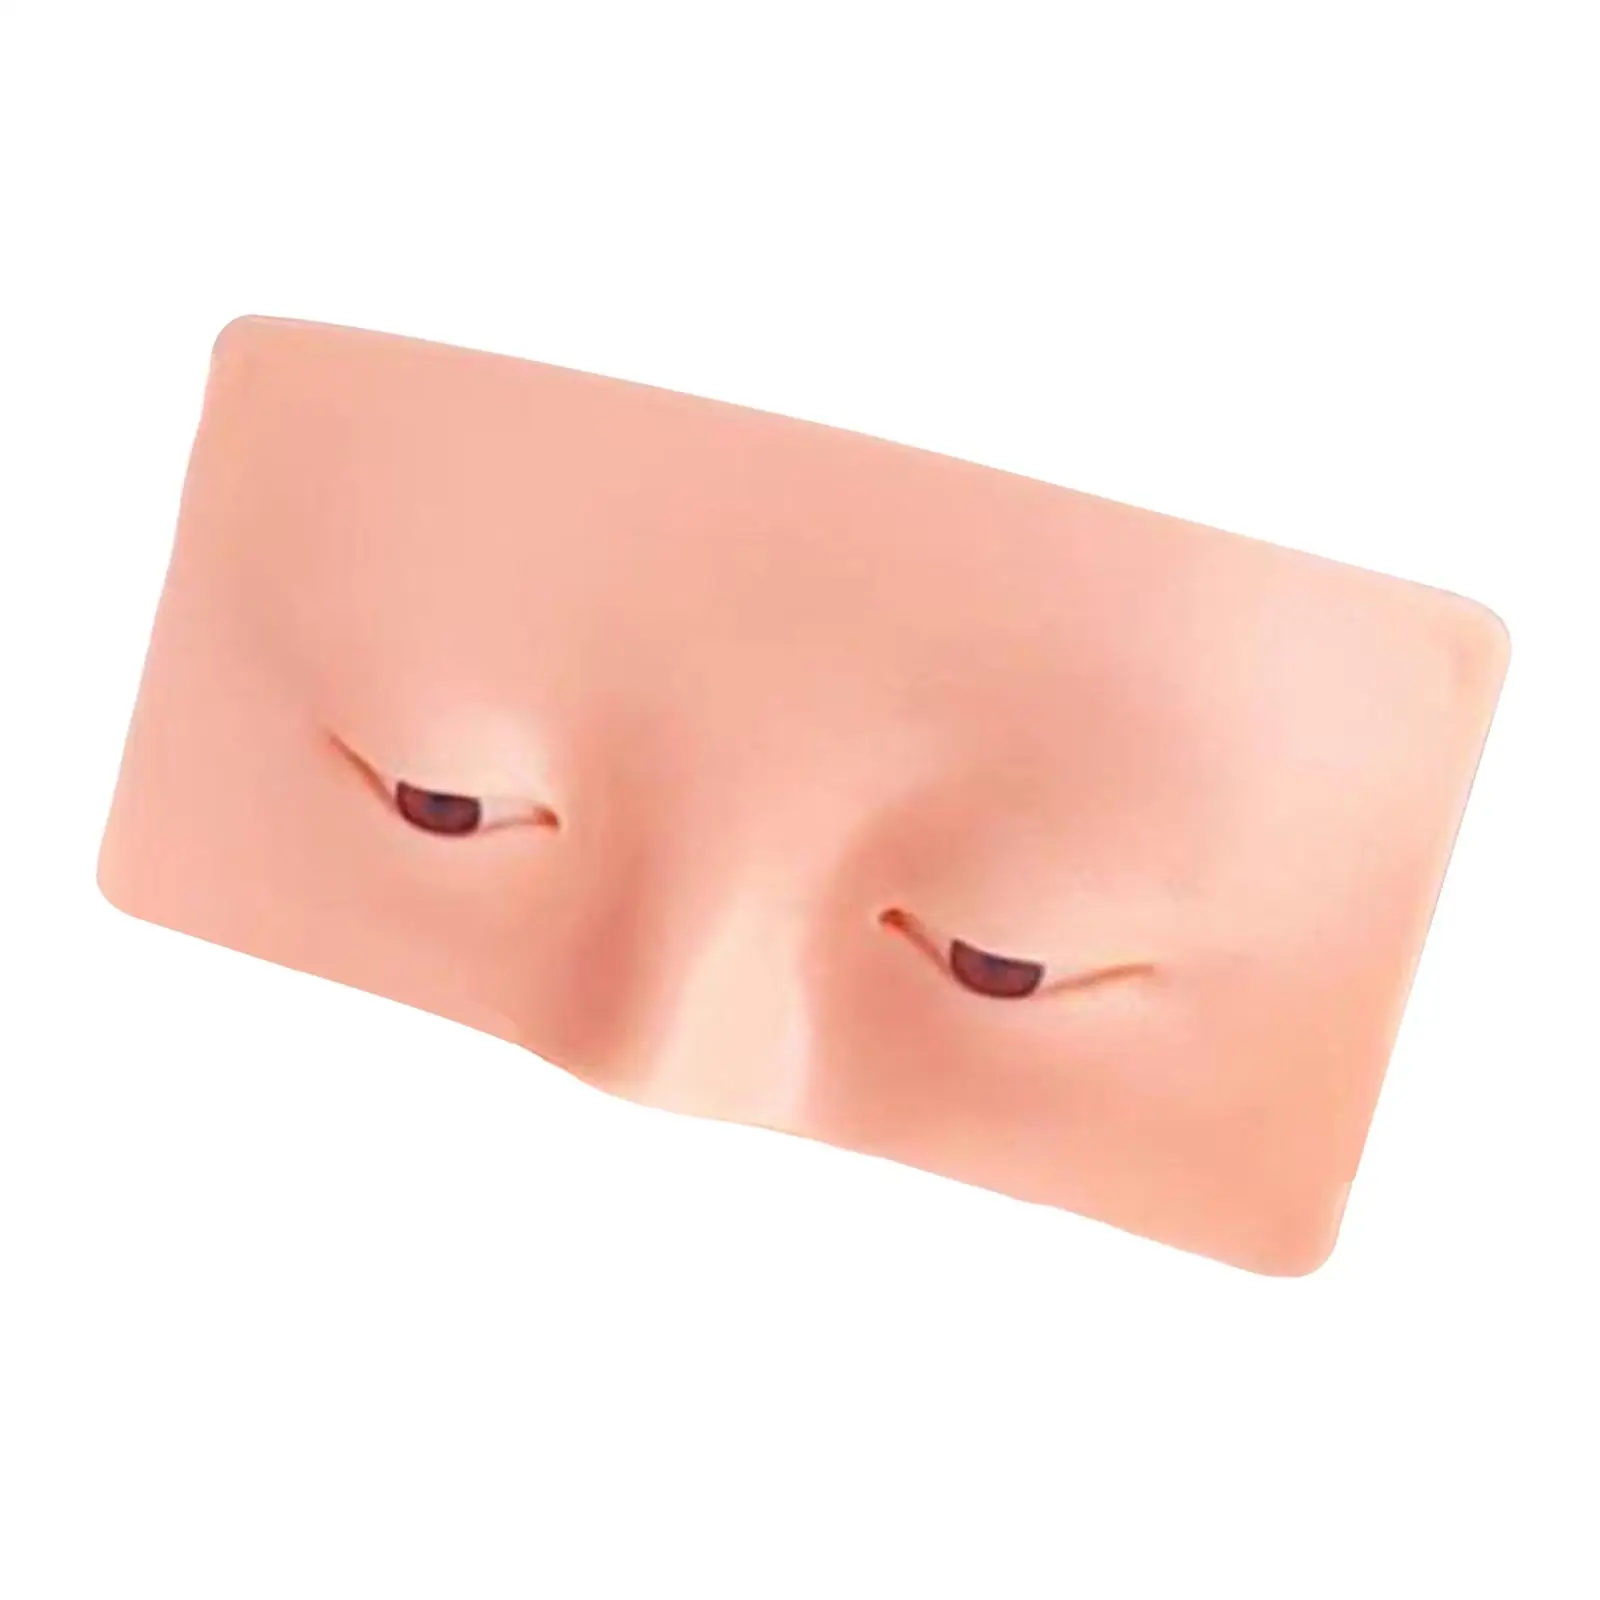 eye Makeup Practice Face Makeup Mannequin Face Beauty Tool Accessory The Perfect Aid to Practicing Makeup for Makeup Artists